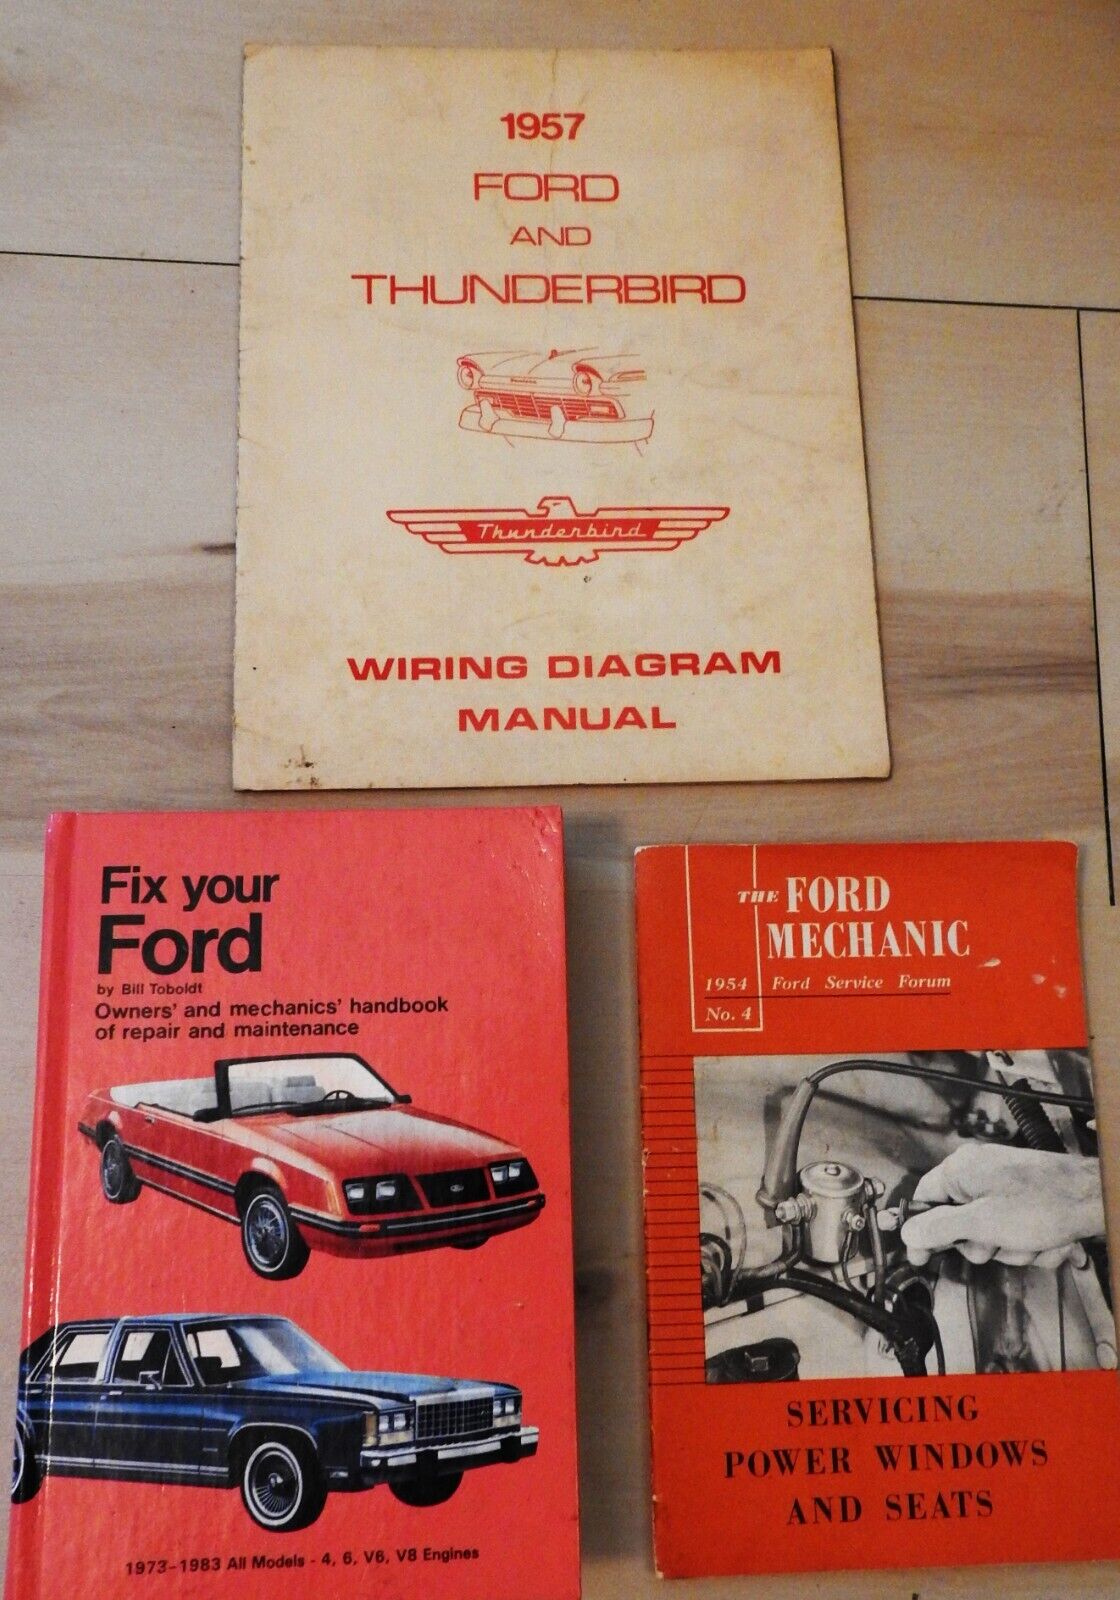 1957 Ford & Thunderbird Wiring Diagram Manual + FIX your FORD + FORD MECHANIC